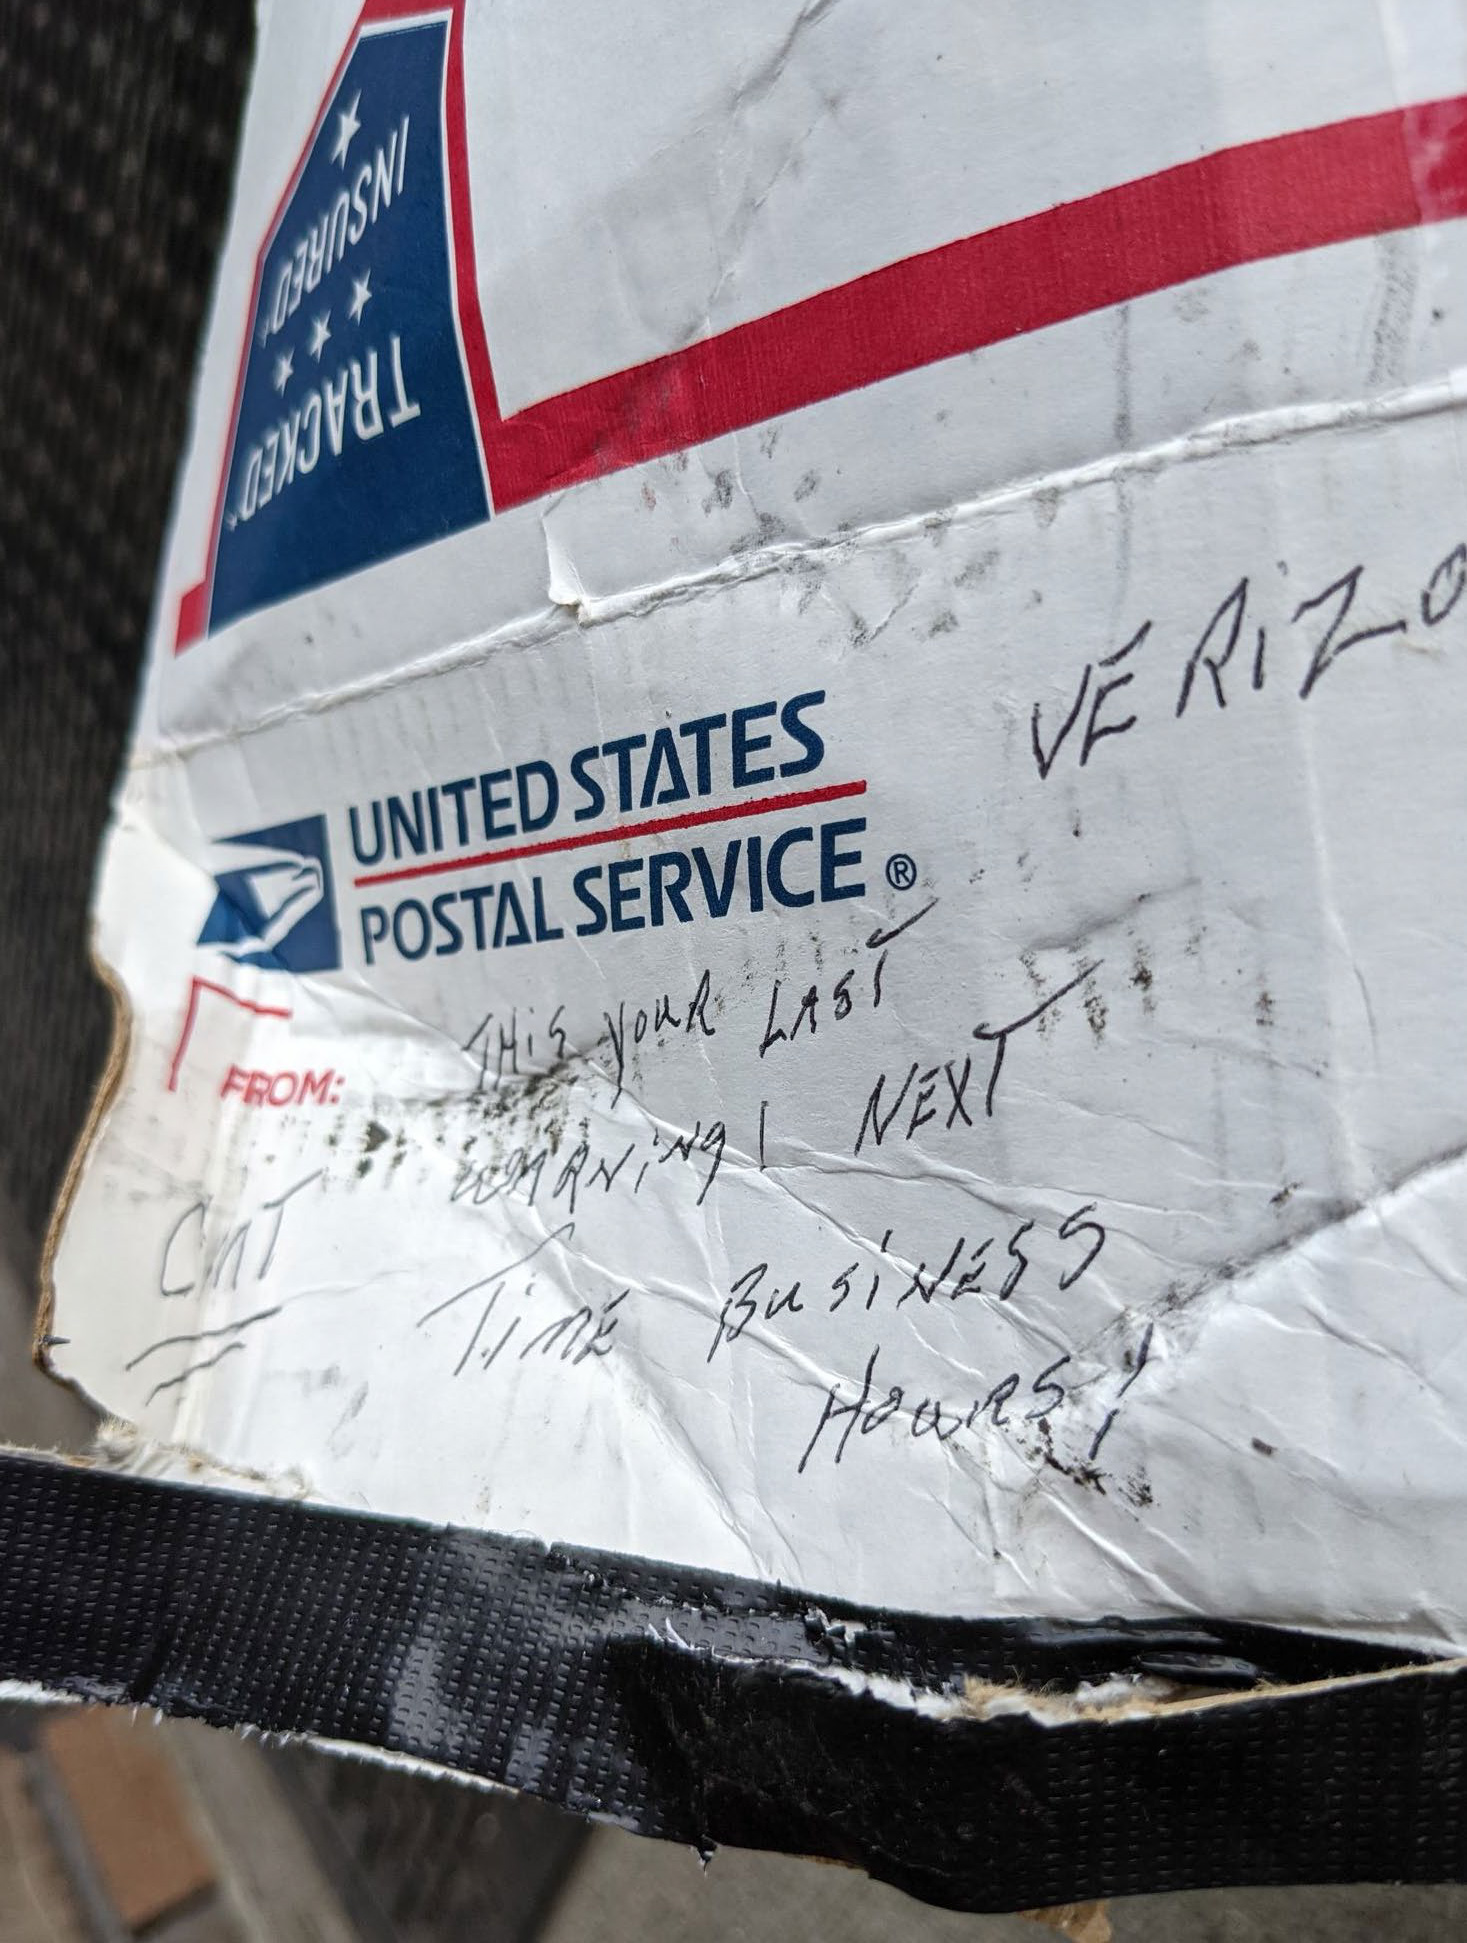 PHOTO: A image used in an FBI criminal complaint shows writing on one of the two boxes containing explosive devices left outside cell phone stores in Michigan, Sept. 15, 2021.